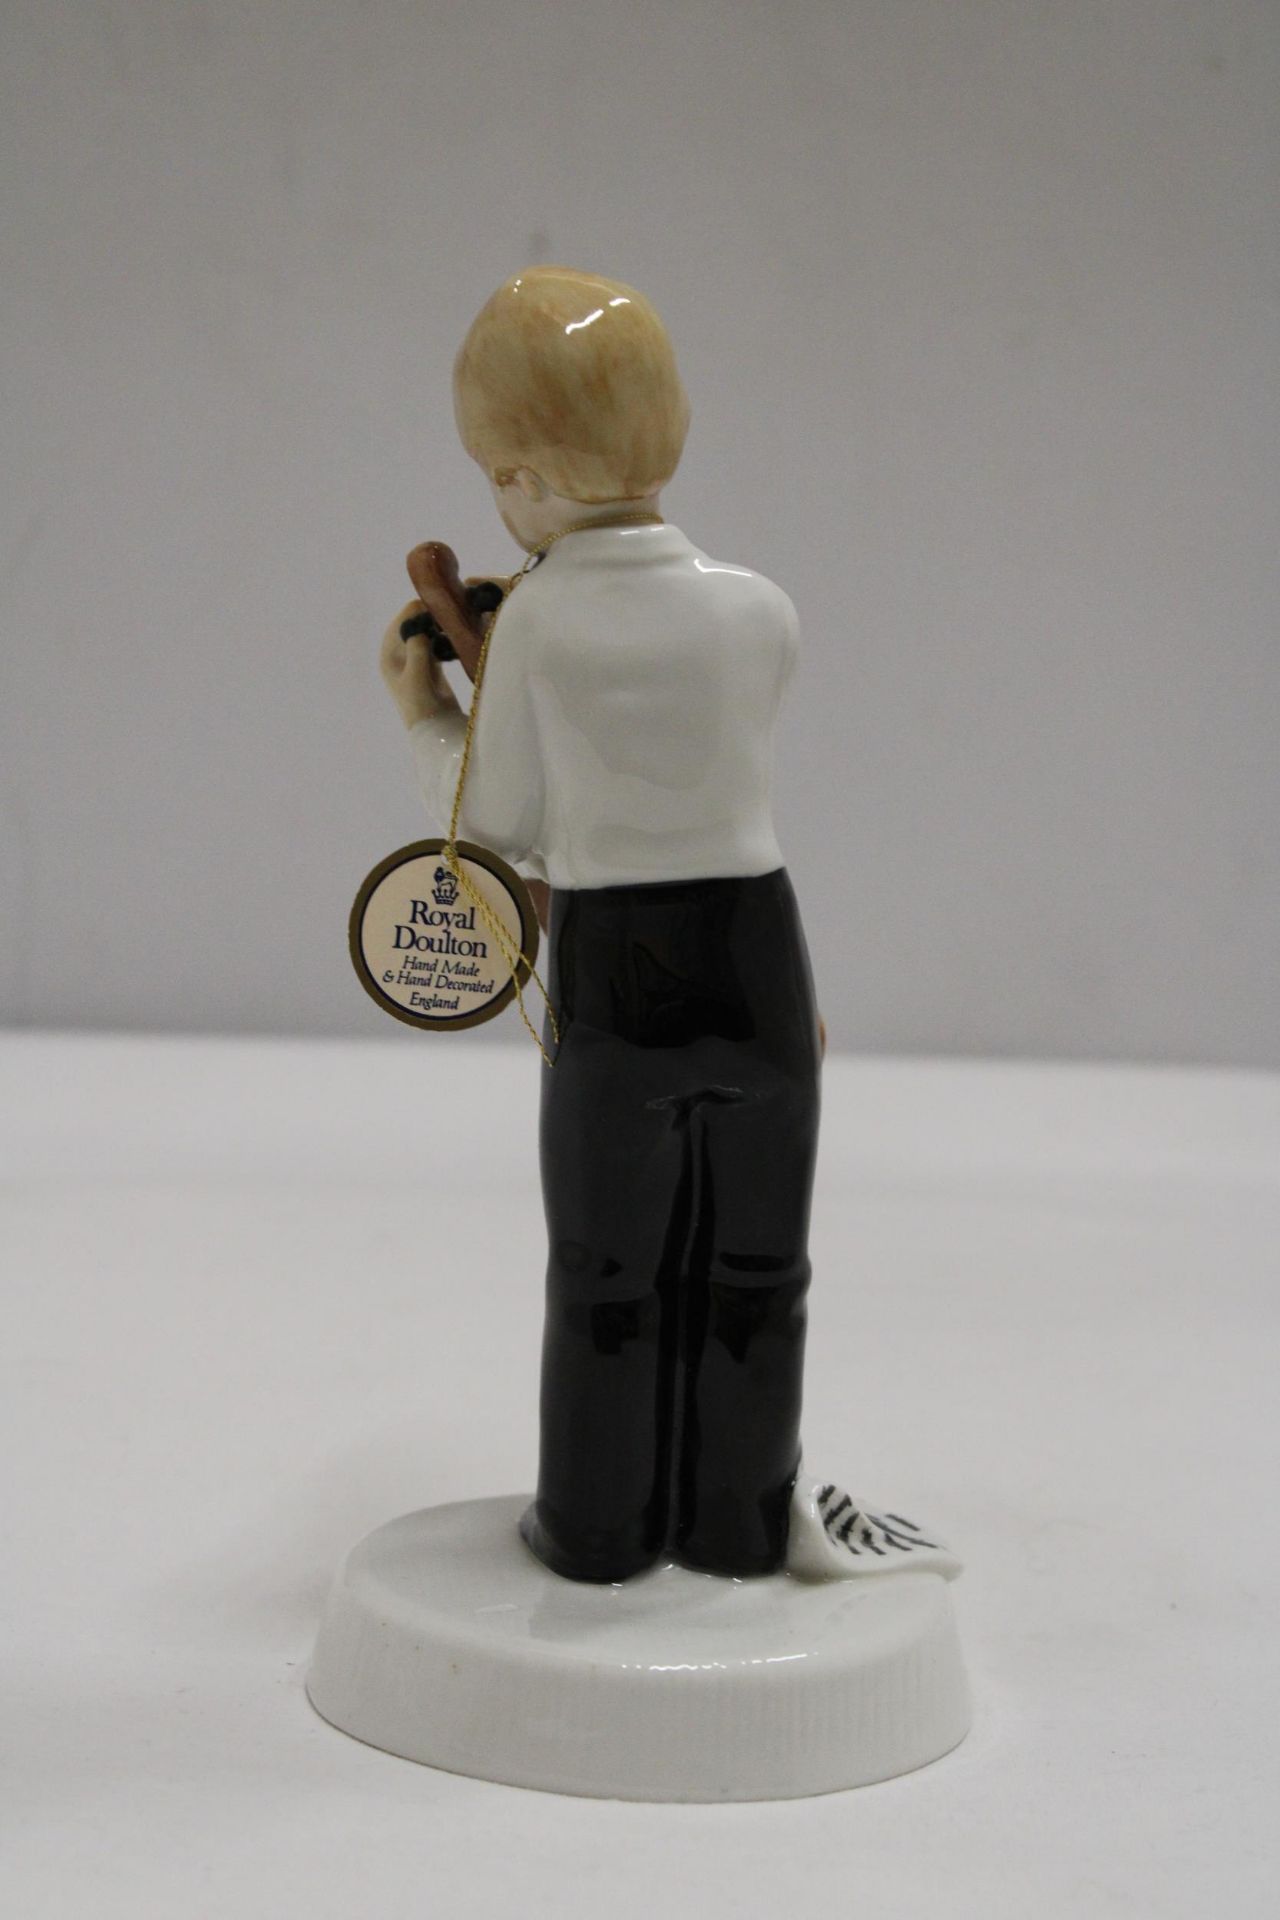 A ROYAL DOULTON CHILDHOOD DAYS "I'M NEARLY READY" FIGURE HN 2976 - Image 4 of 6